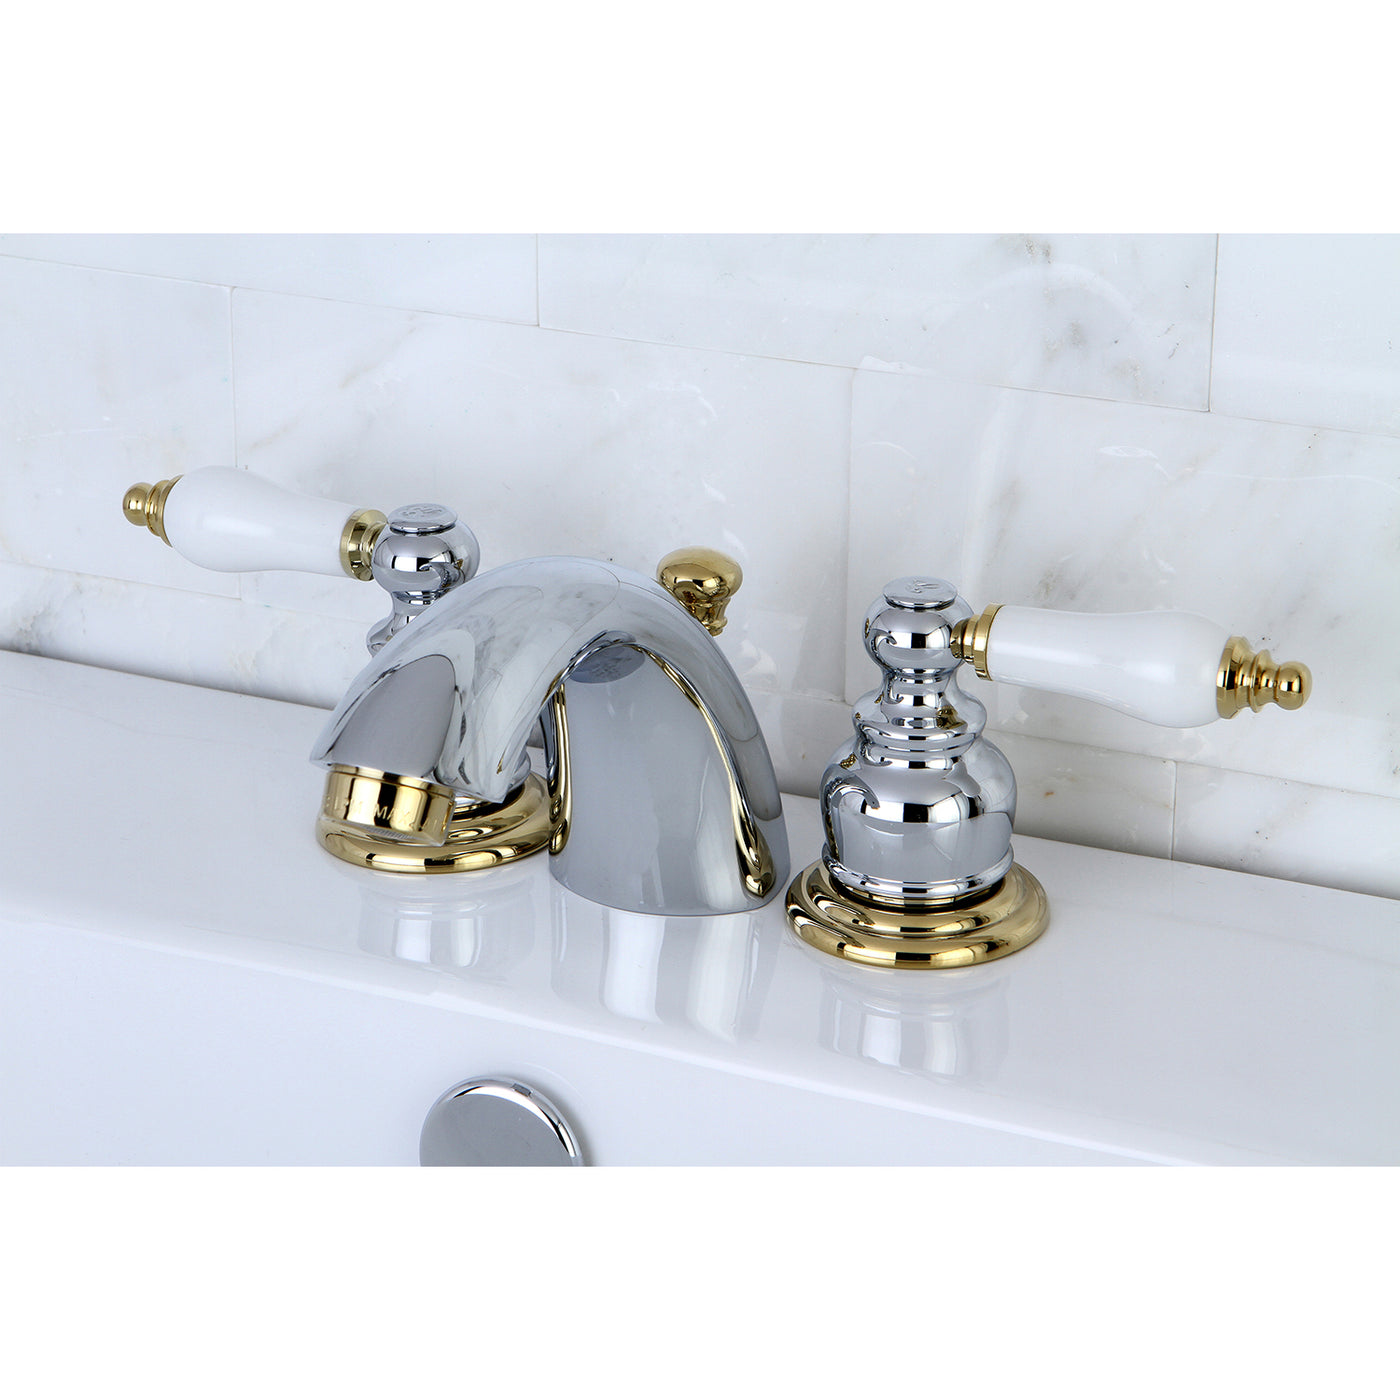 Elements of Design EB944B Mini-Widespread Bathroom Faucet with Retail Pop-Up, Polished Chrome/Polished Brass